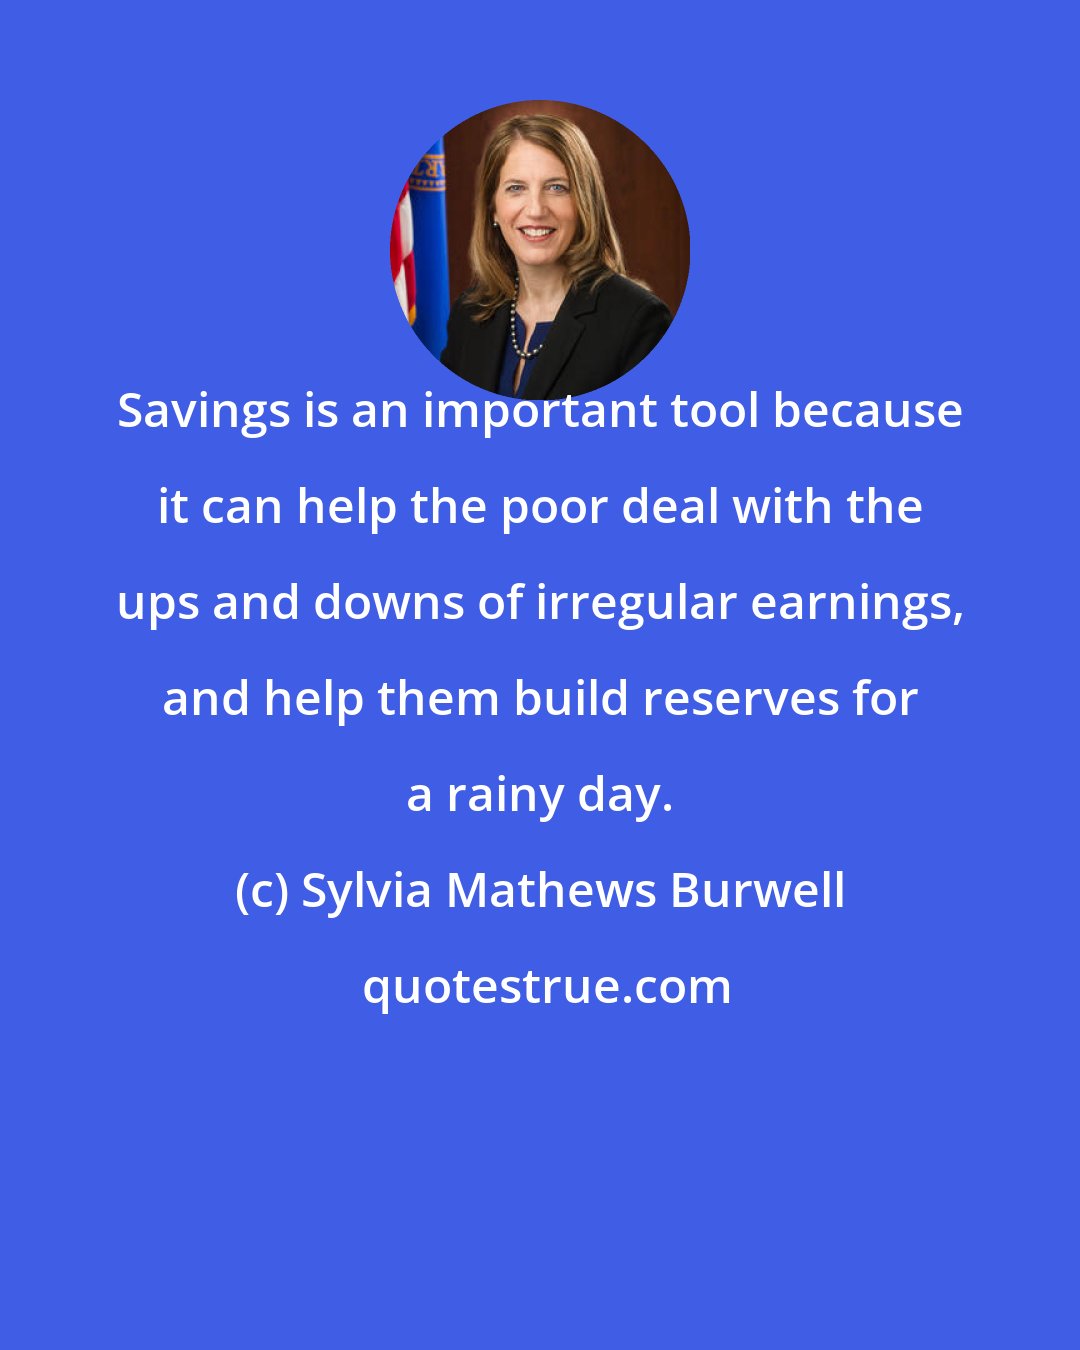 Sylvia Mathews Burwell: Savings is an important tool because it can help the poor deal with the ups and downs of irregular earnings, and help them build reserves for a rainy day.